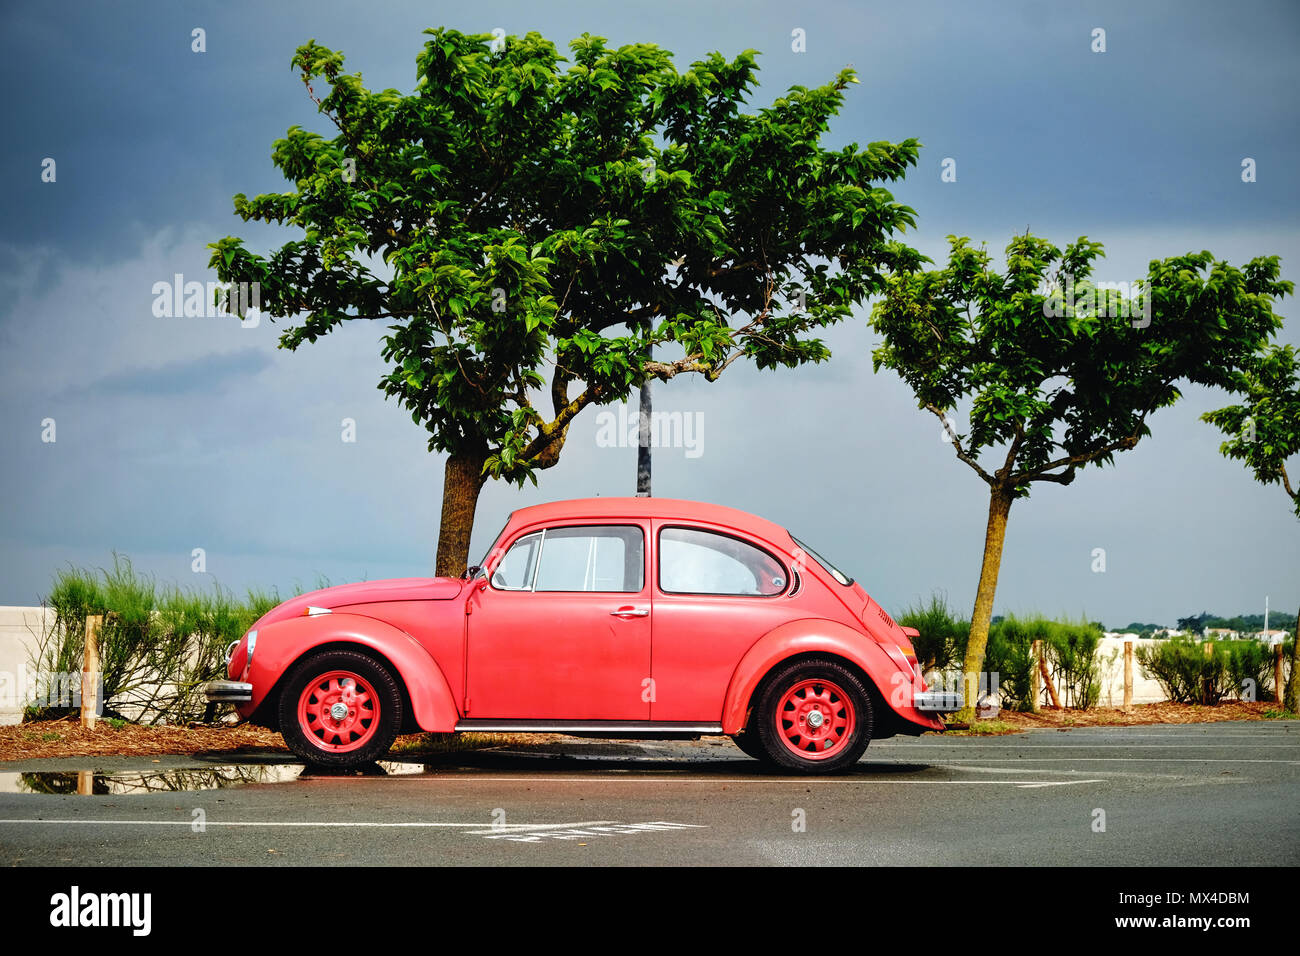 A red VW beetle, lit by the sun against a dark stormy sky Stock Photo